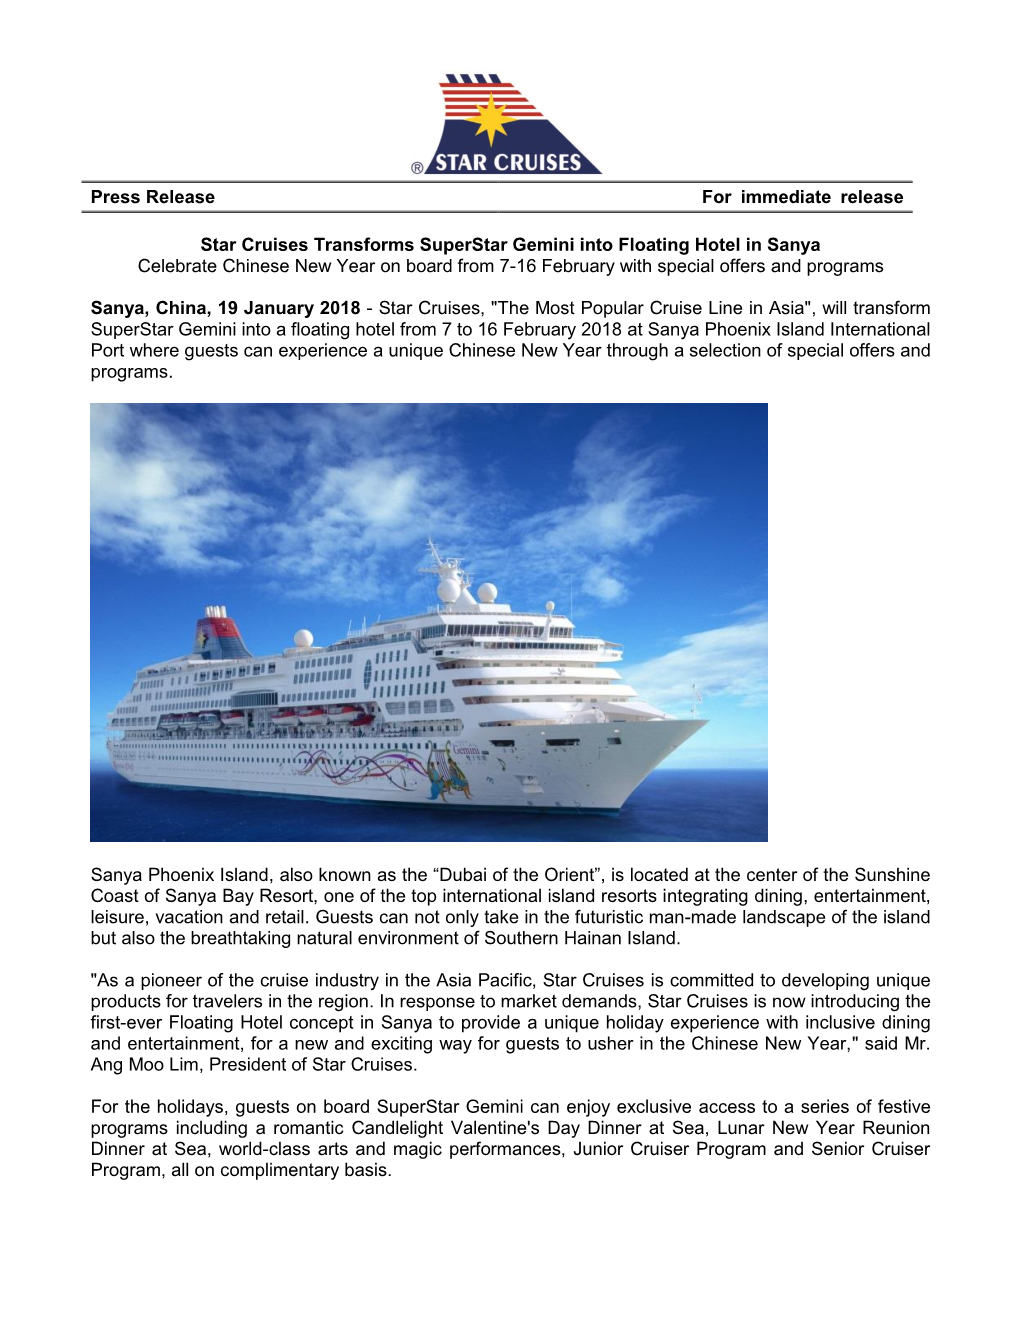 Press Release for Immediate Release Star Cruises Transforms Superstar